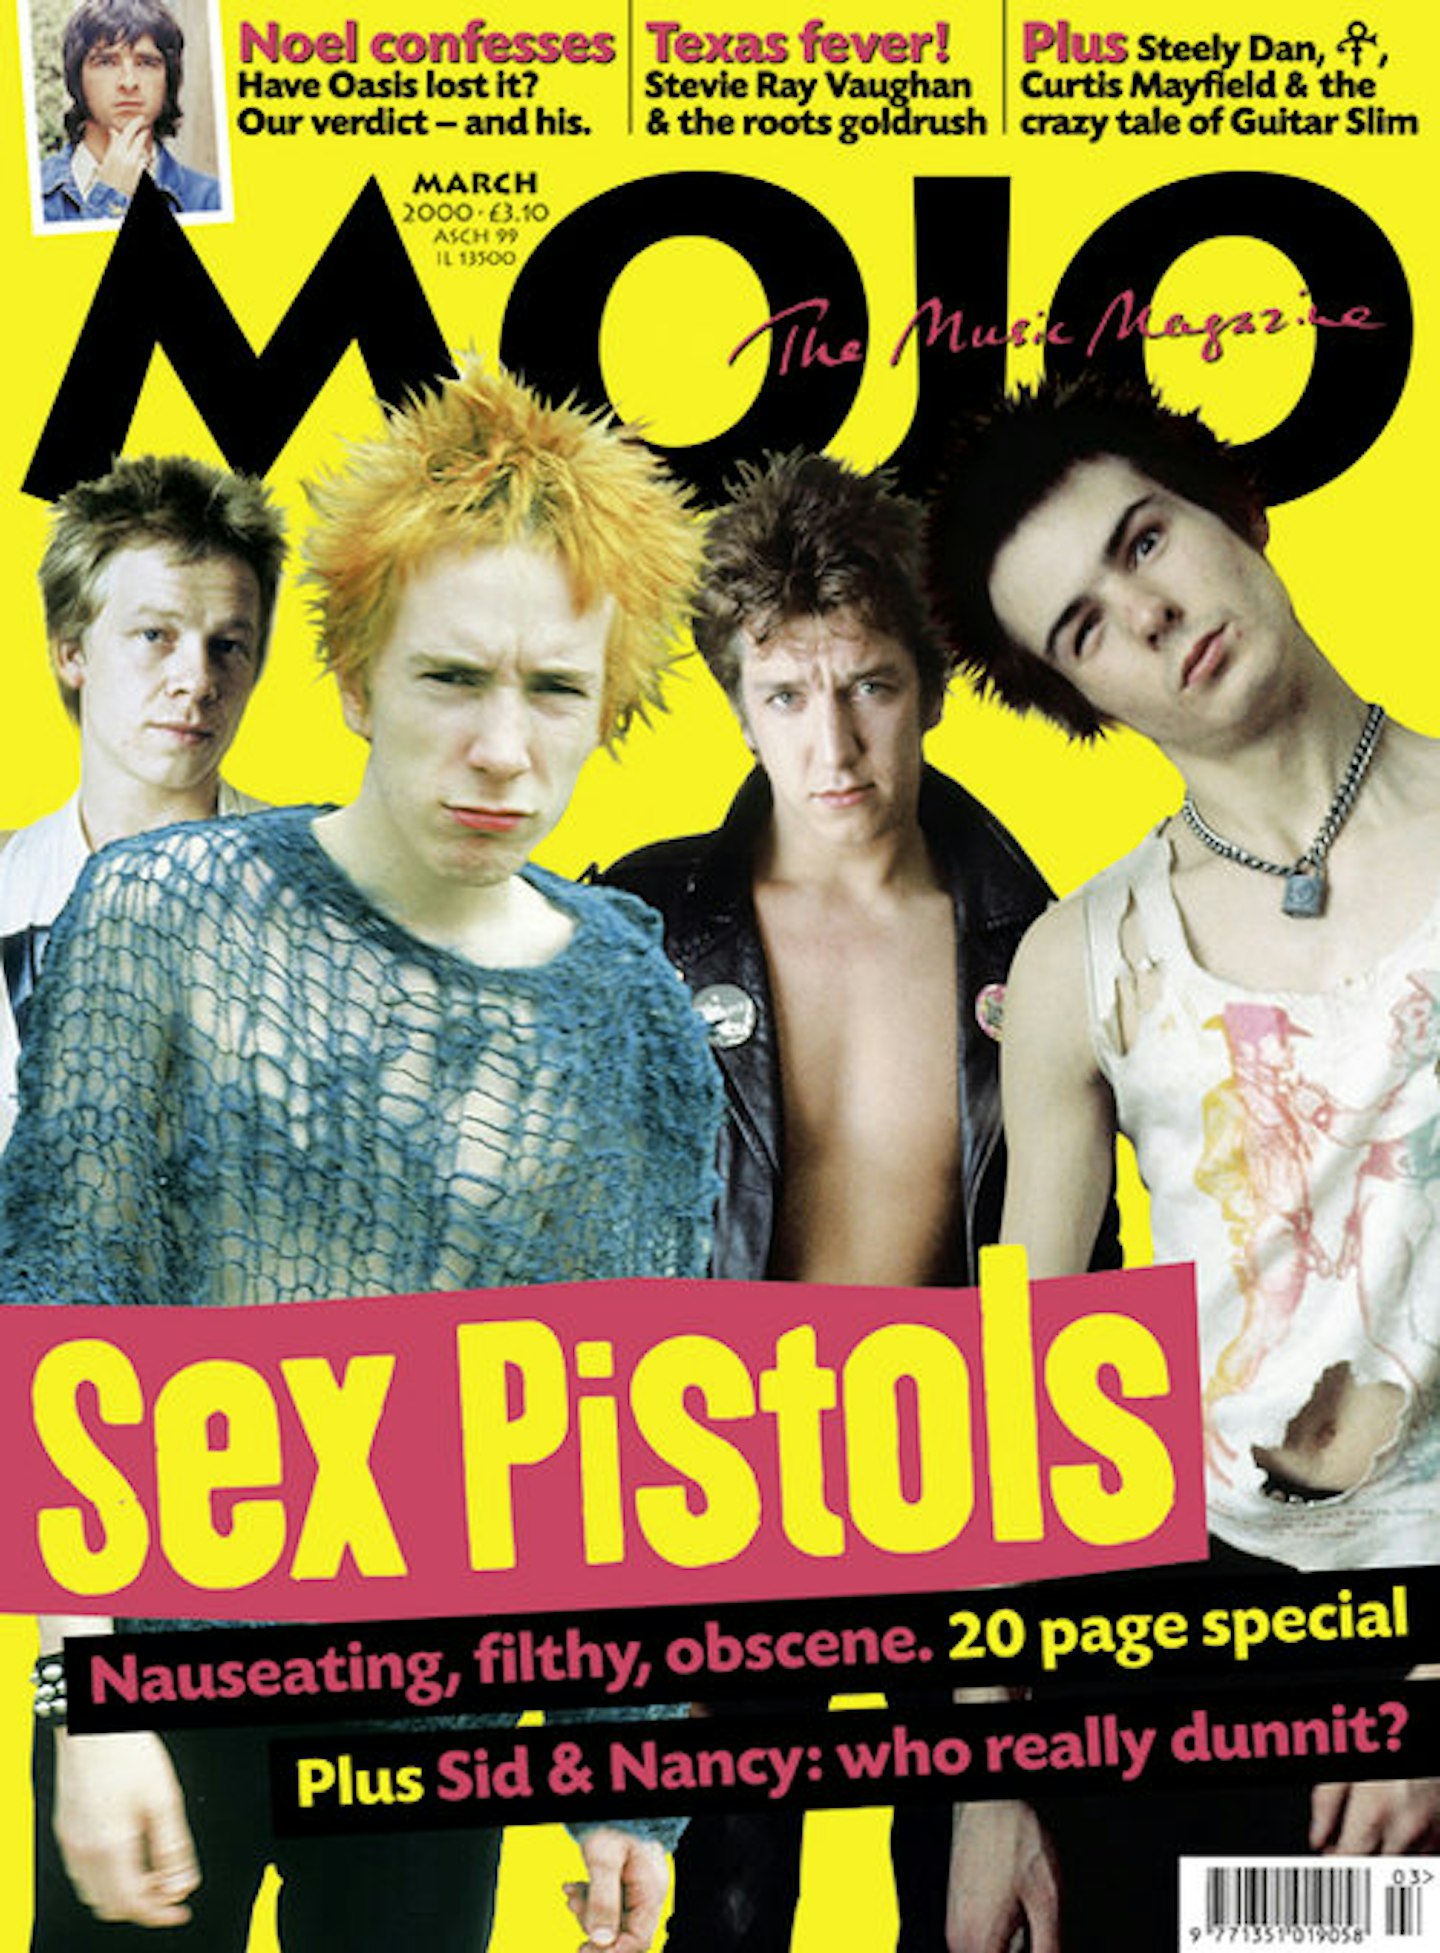 MOJO Issue 76 / March 2000